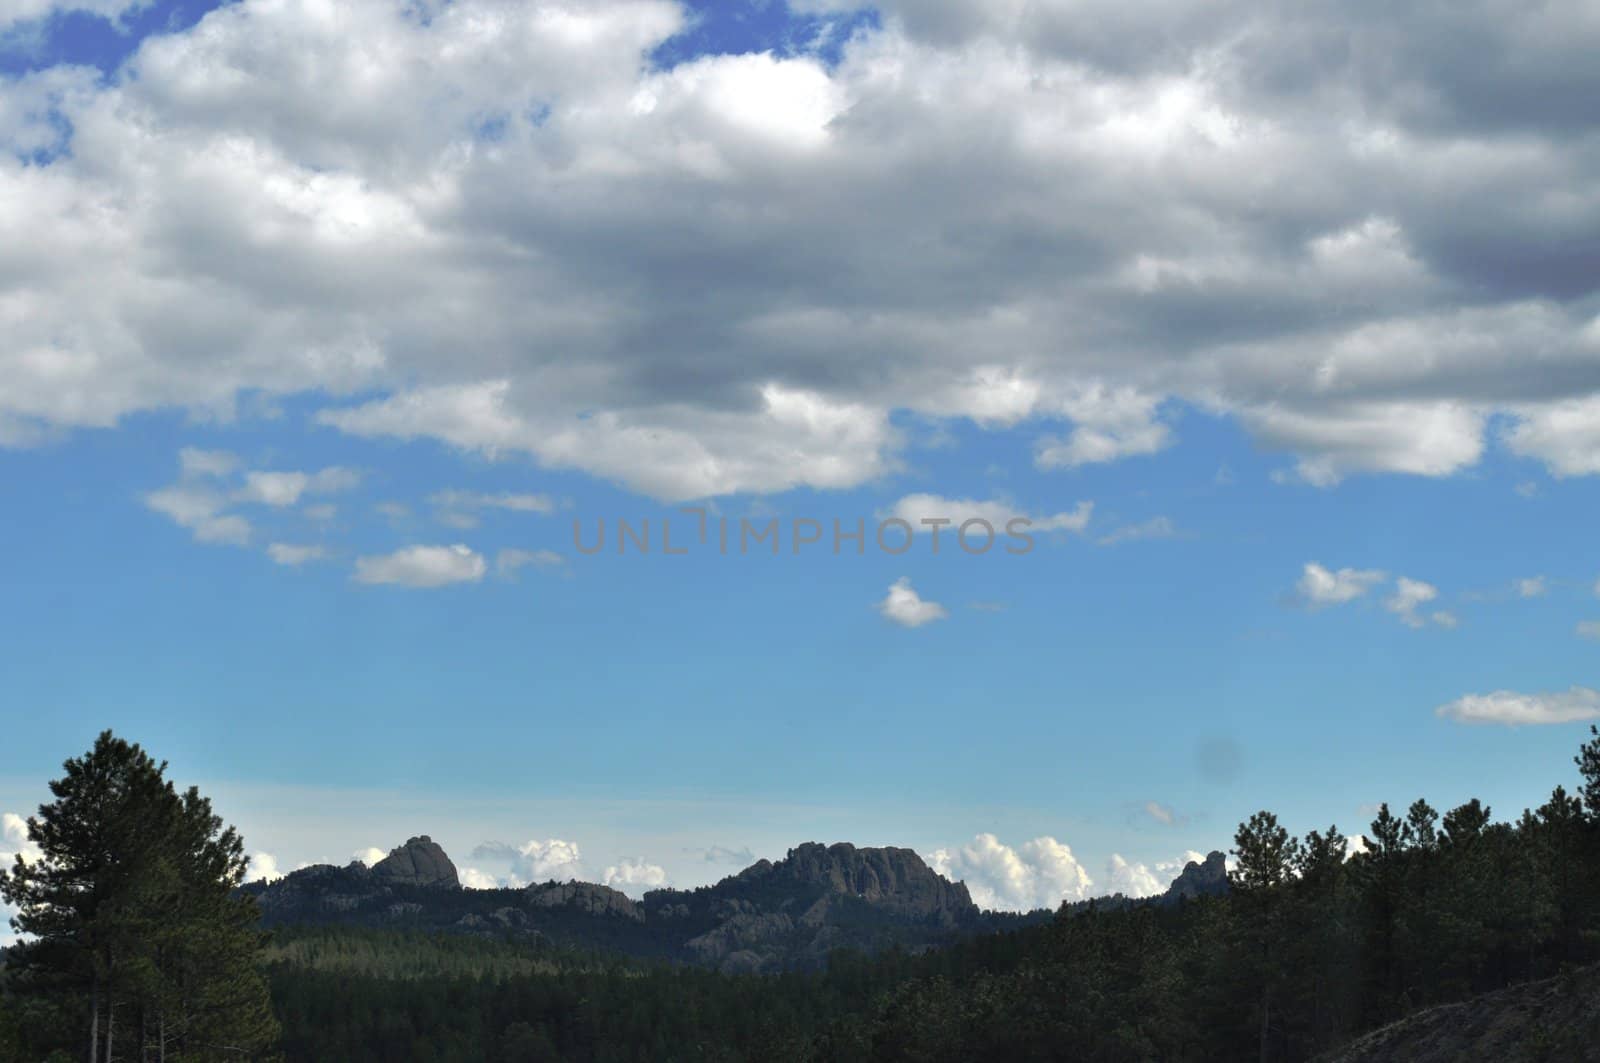 Black hills and sky background